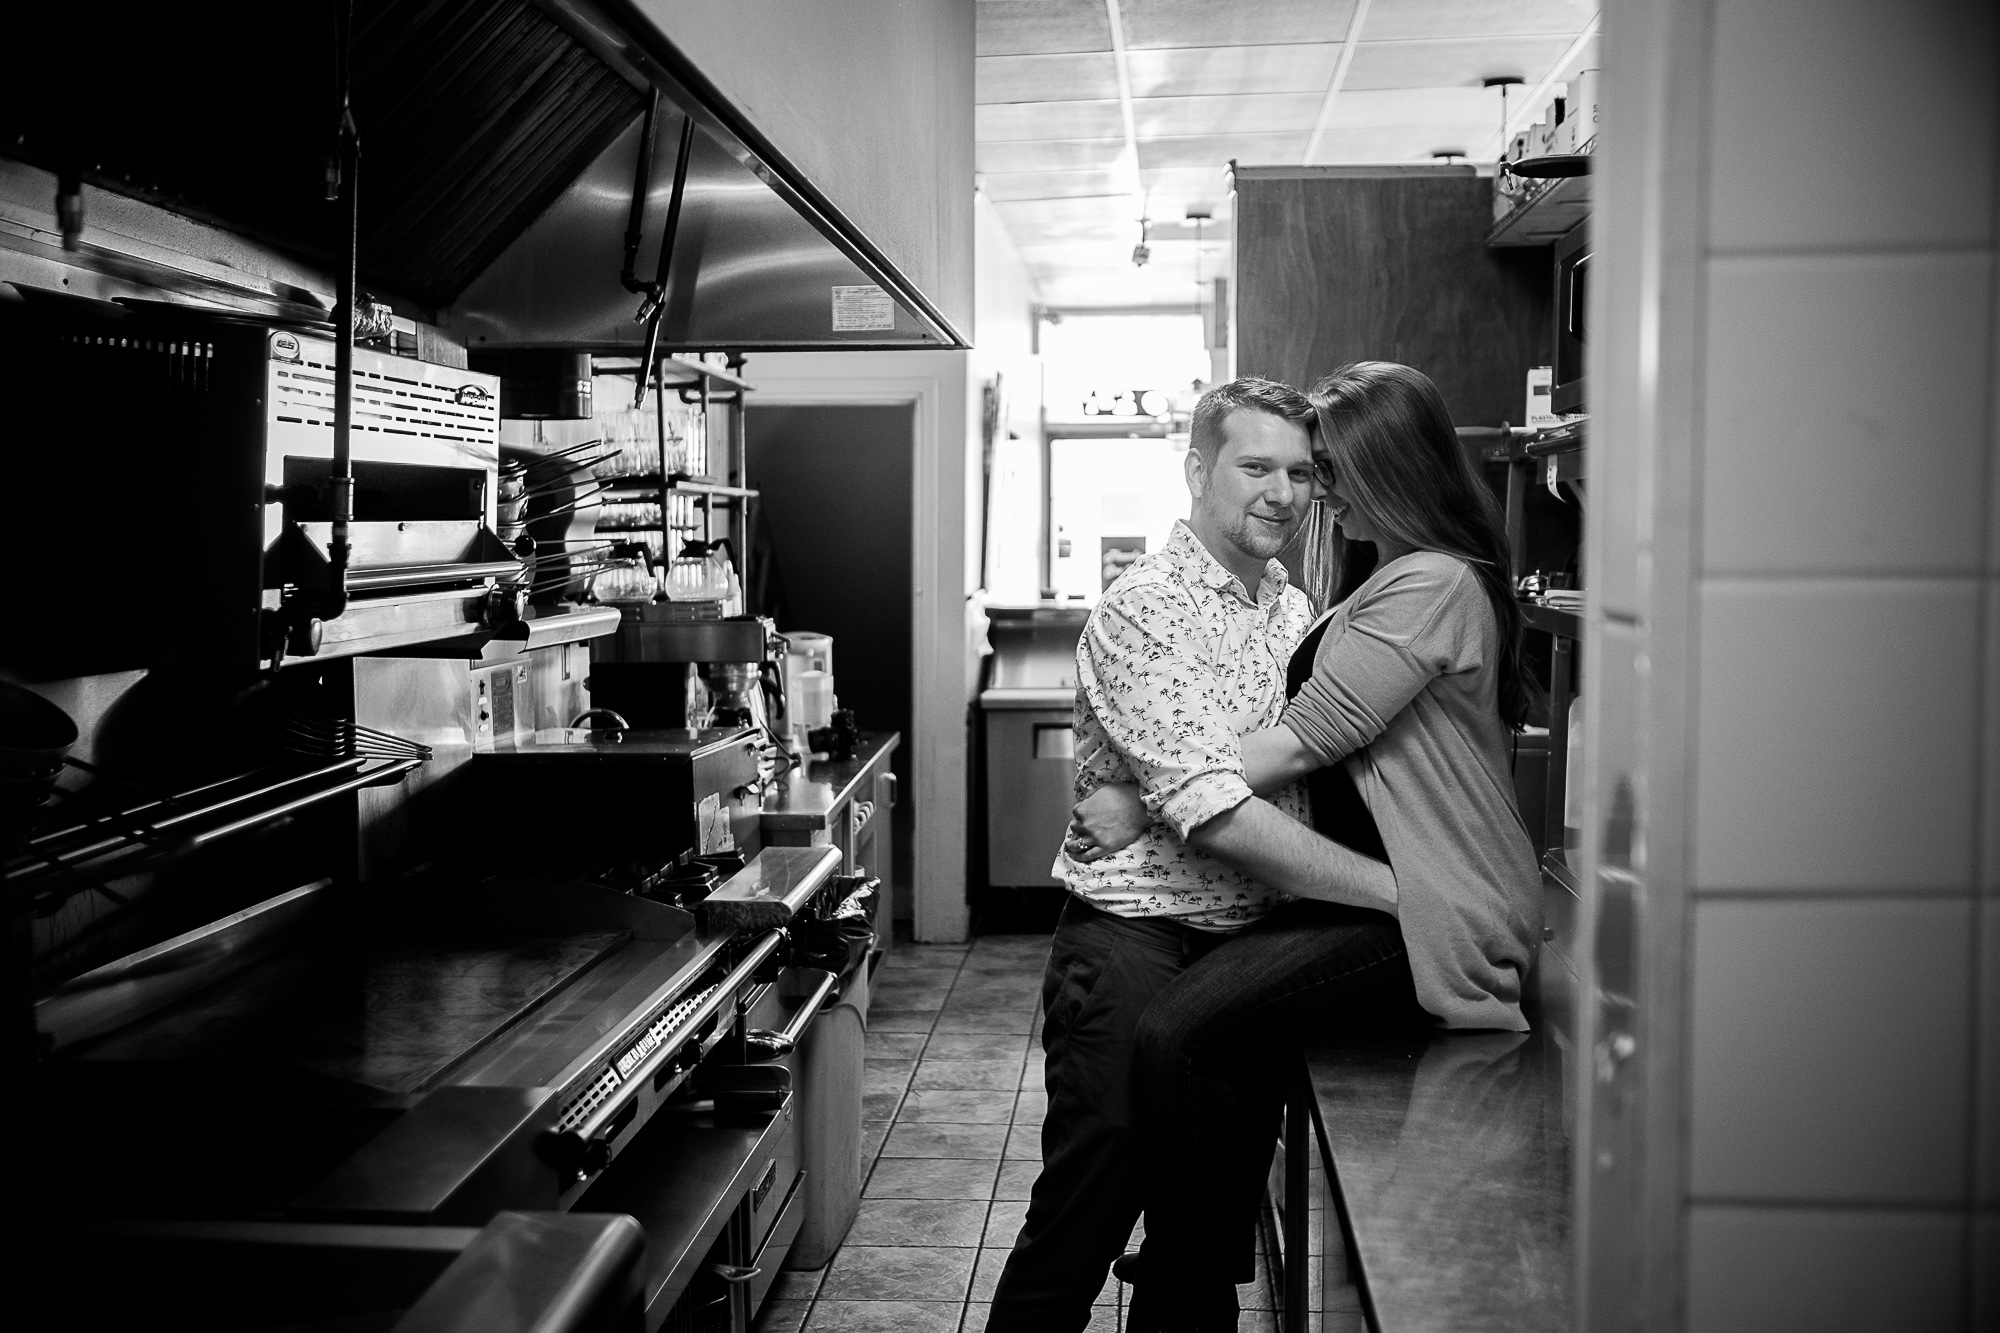  Haley + Stephen pose for a quick engagement portrait inside the kitchen of their Toronto restaurant.&nbsp; 